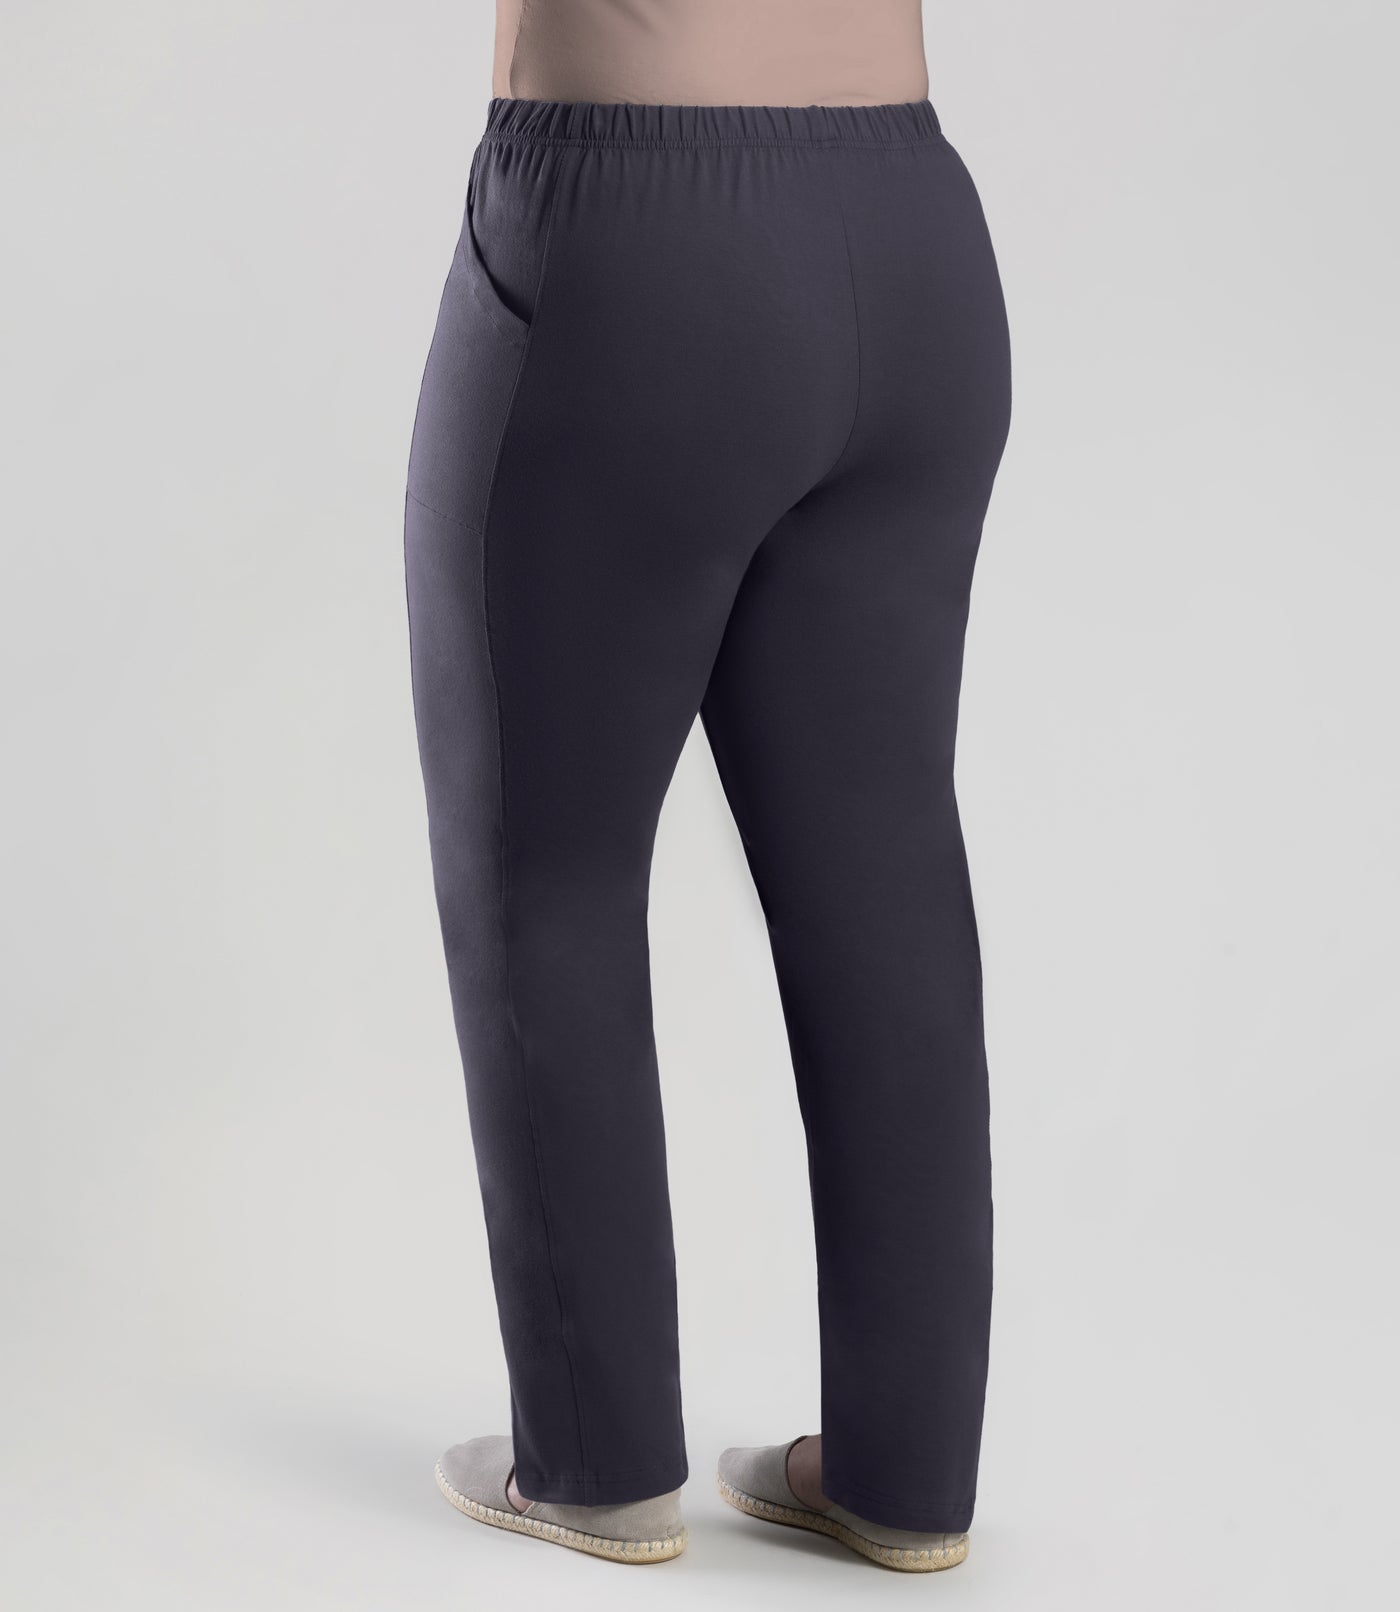 Bottom half of plus sized woman, back view, wearing JunoActive Stretch Naturals Side Pocket Loose Fit Leggings in color oak gray. Bottom hem is at the ankle